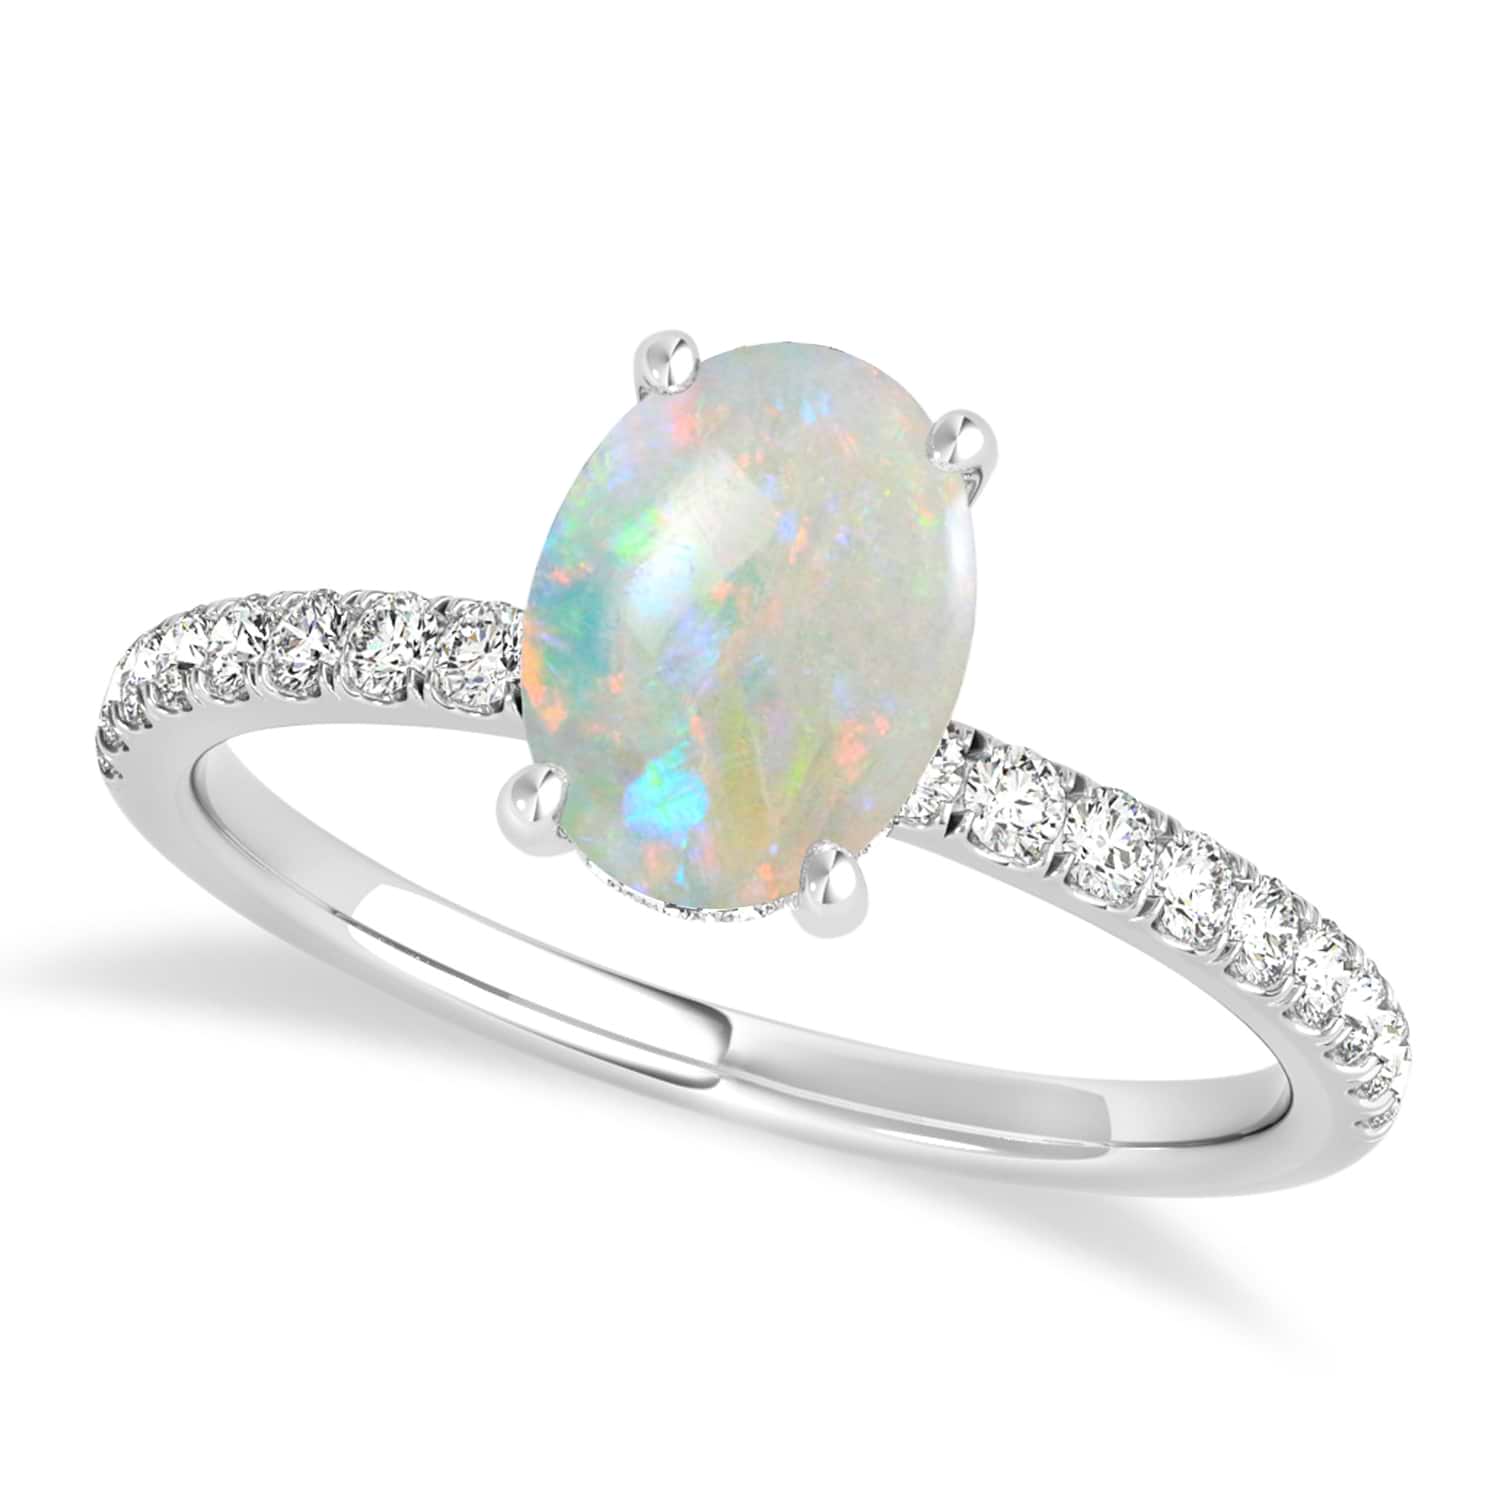 Oval Opal & Diamond Single Row Hidden Halo Engagement Ring 18k White Gold (0.68ct)